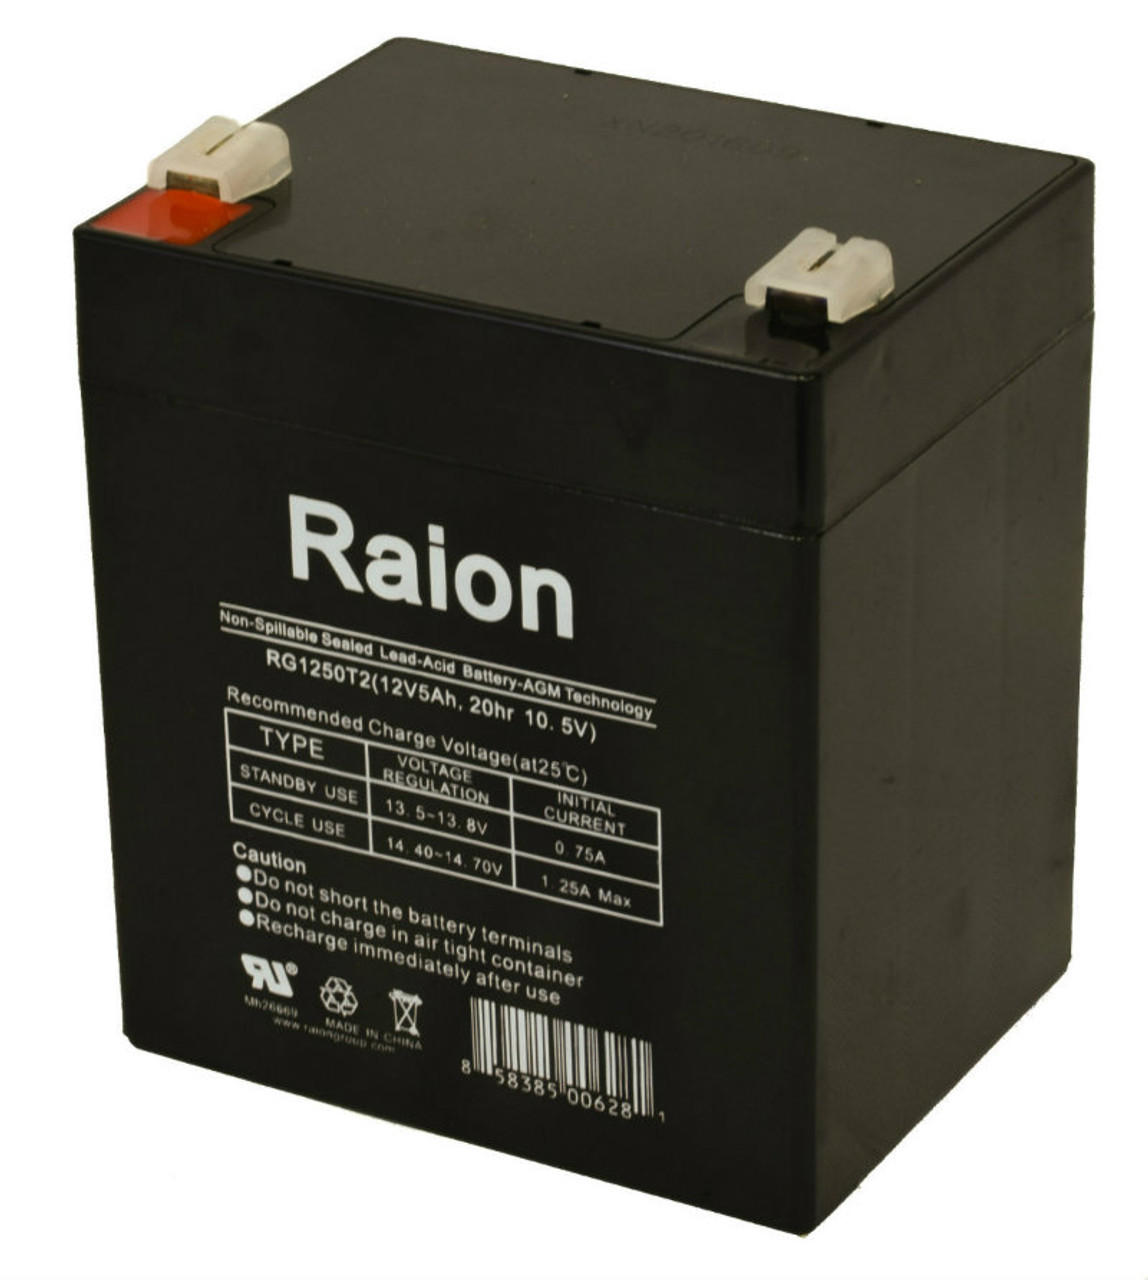 Raion Power RG1250T1 Replacement Alarm Security System Battery for ACME Security System AL6/12